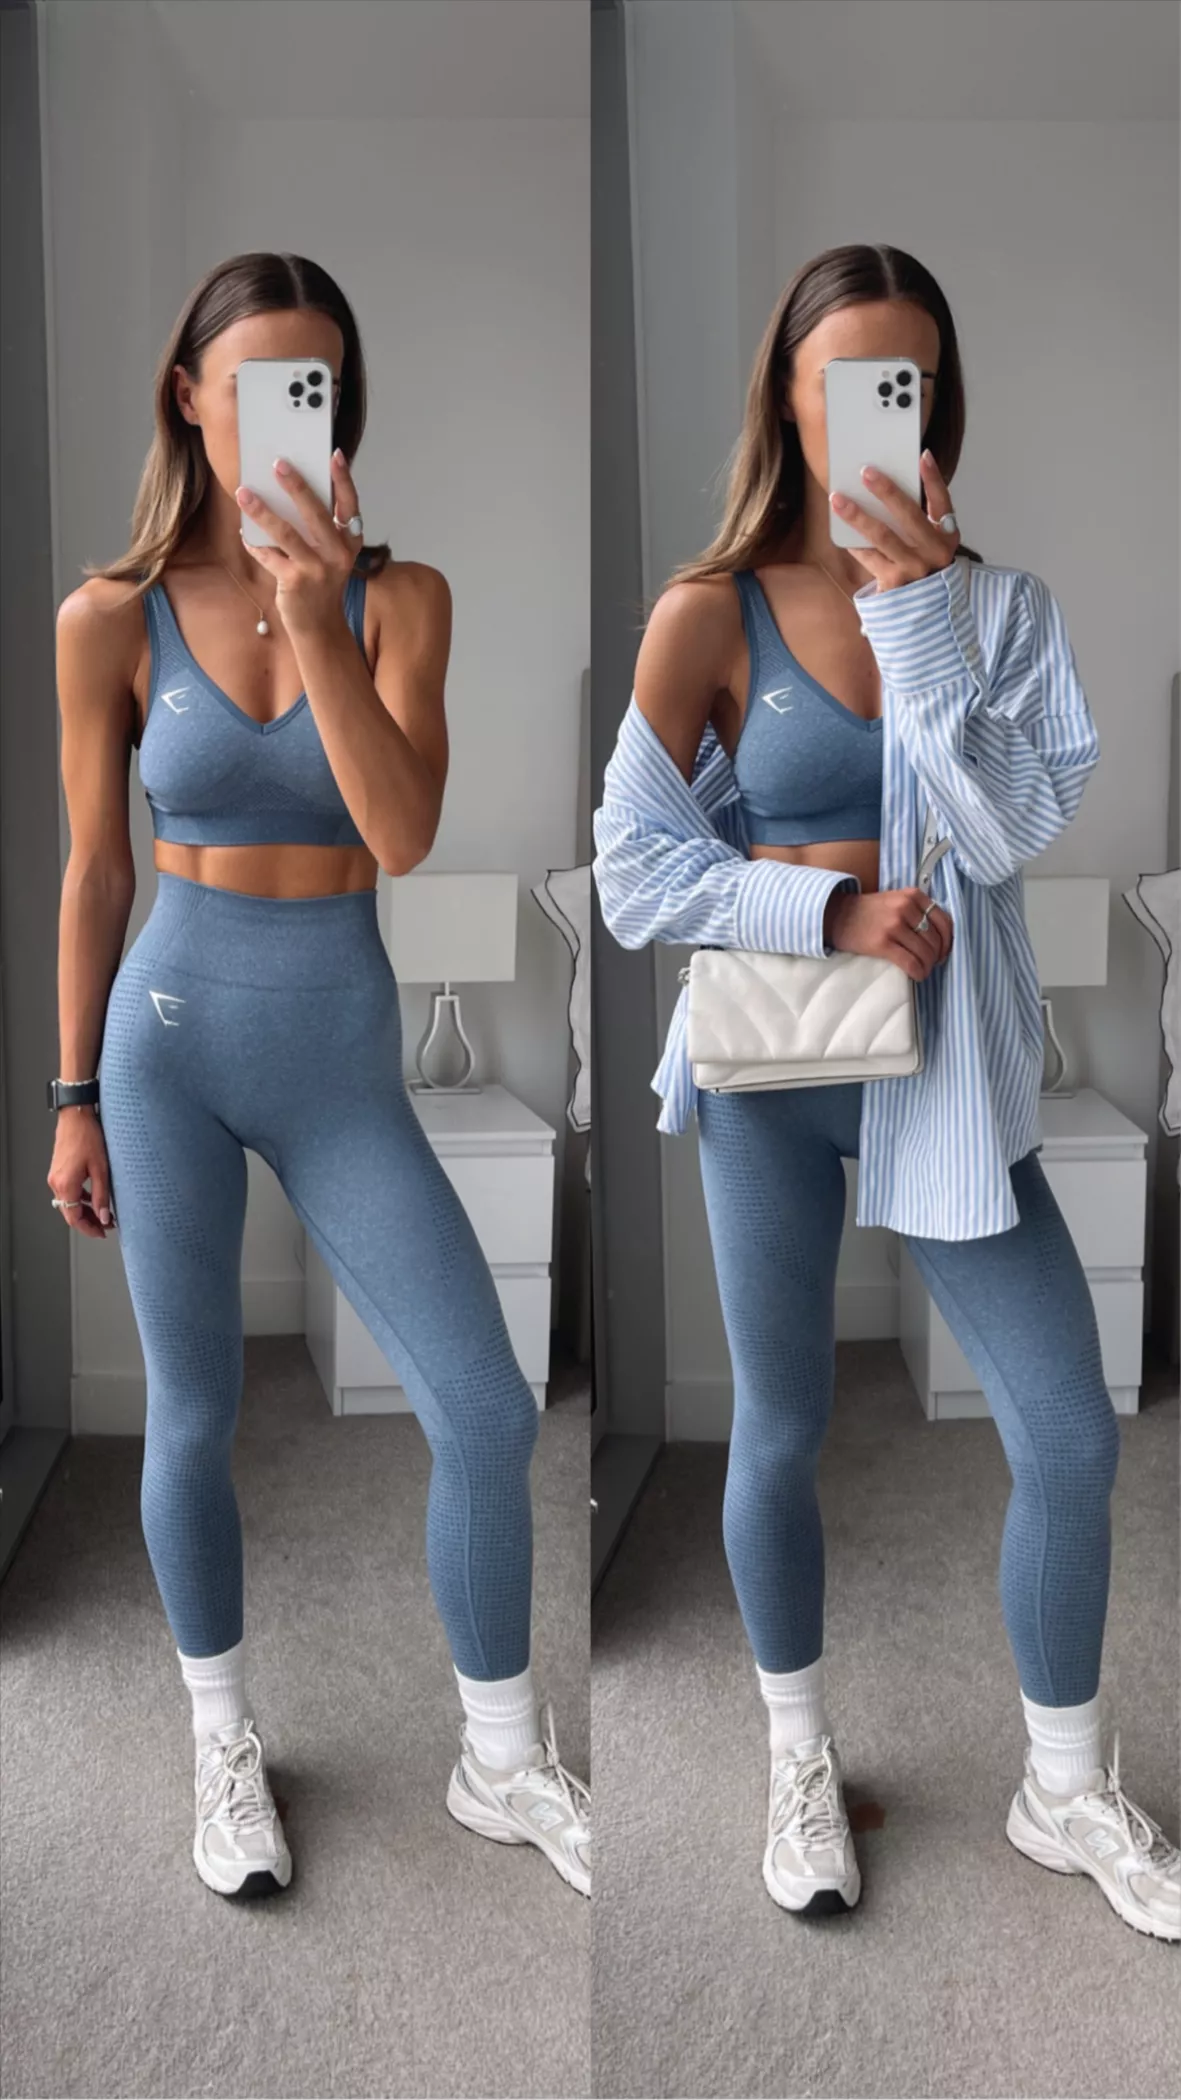 Gymshark Outfit x 2